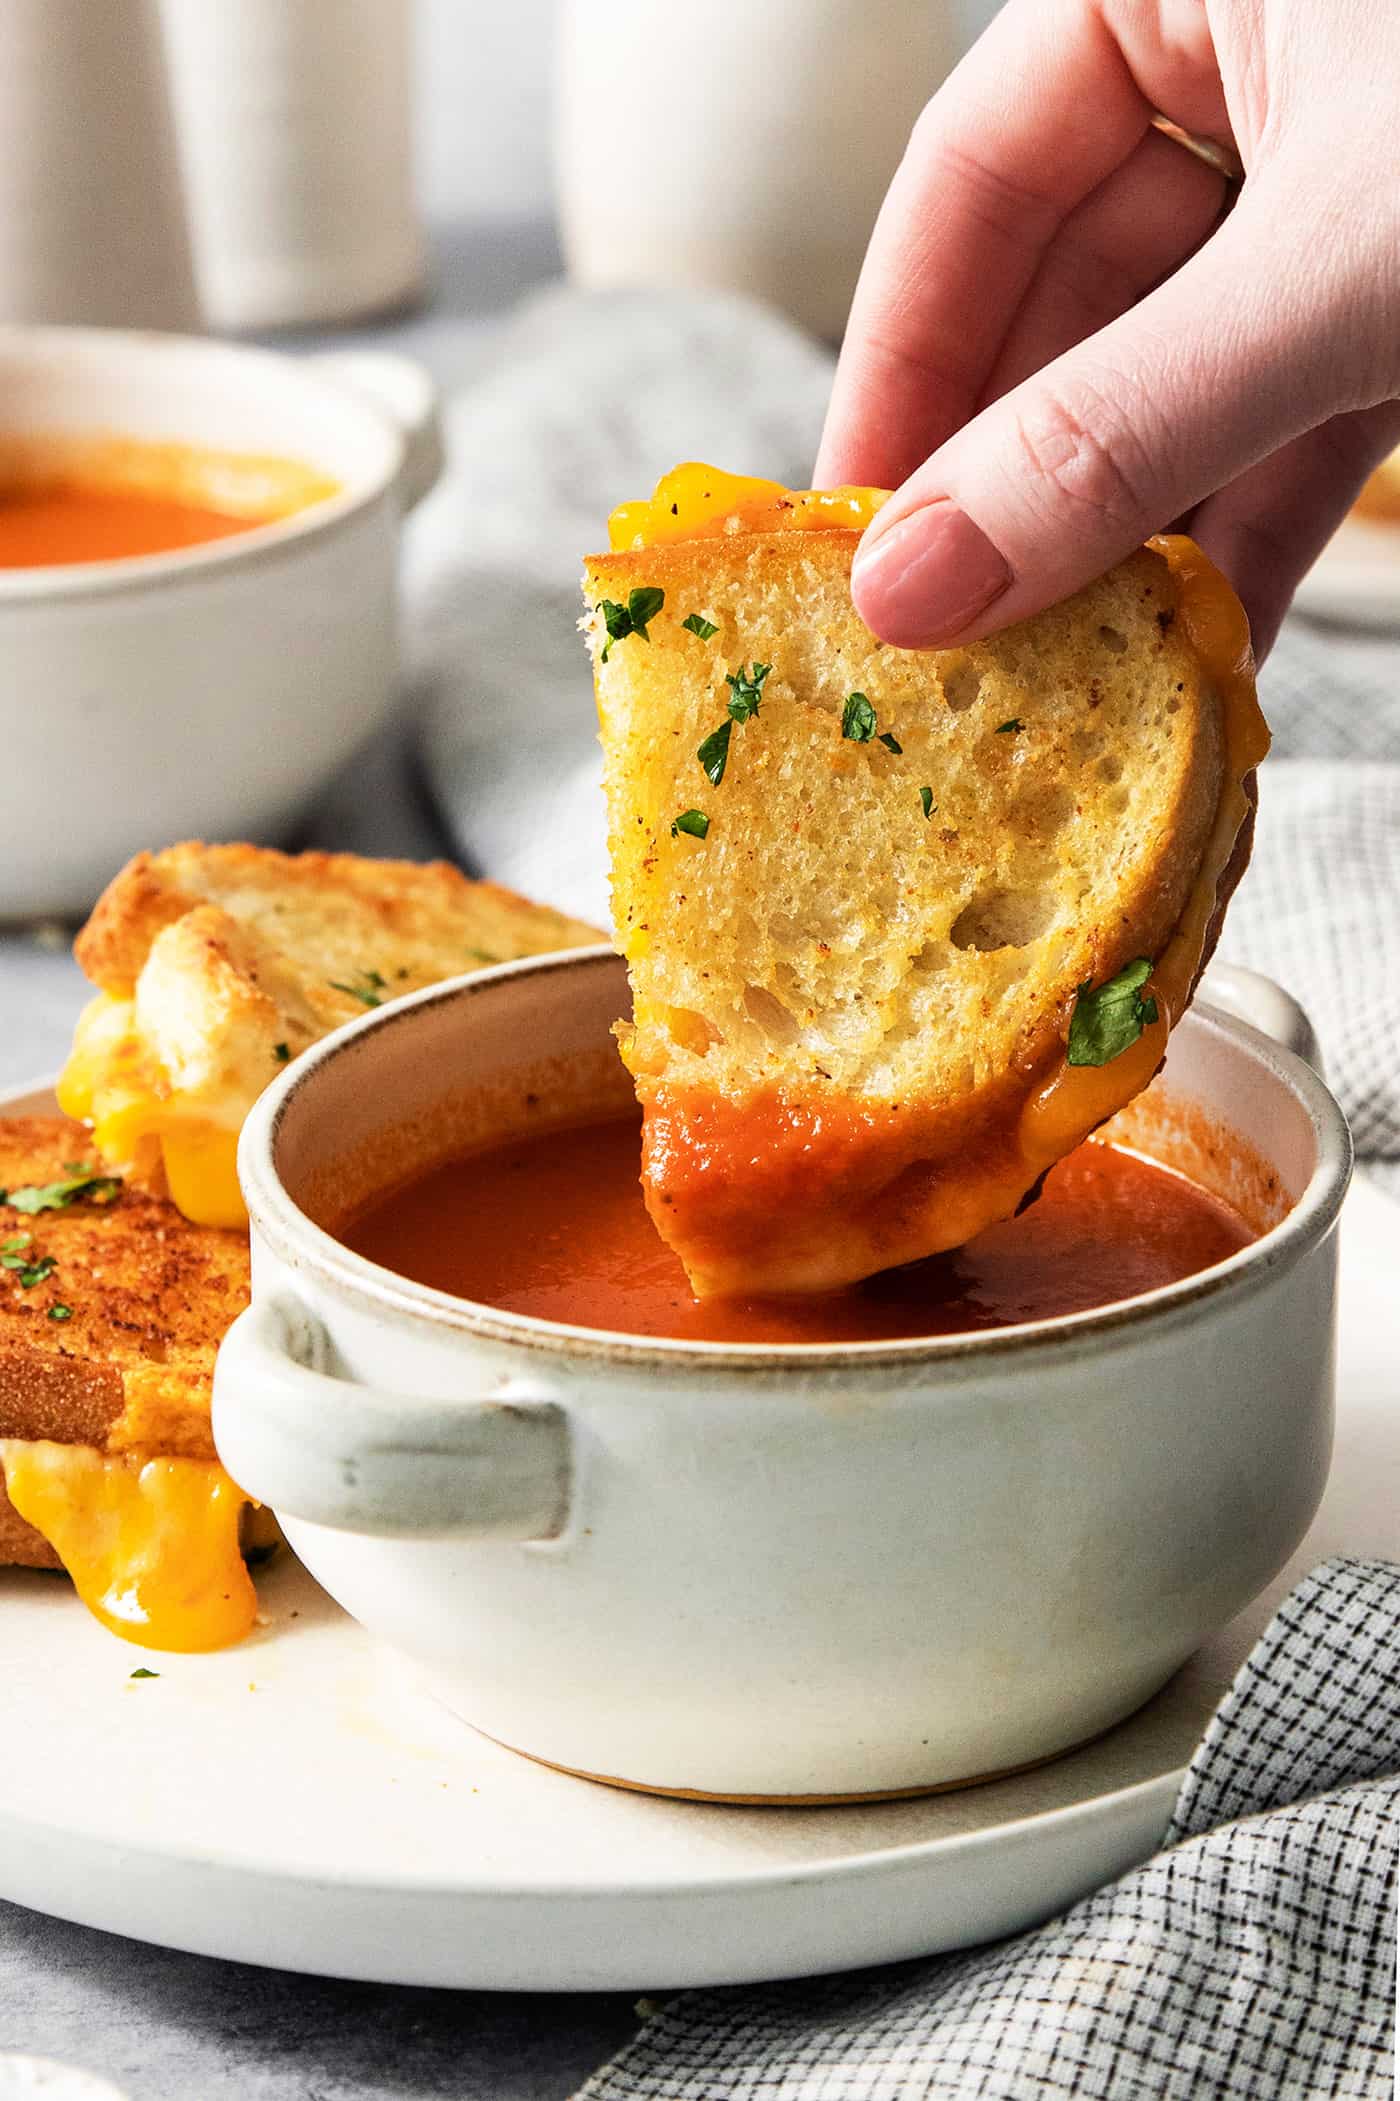 A hand dips a piece of air fryer grilled cheese into a small bowl of tomato soup.